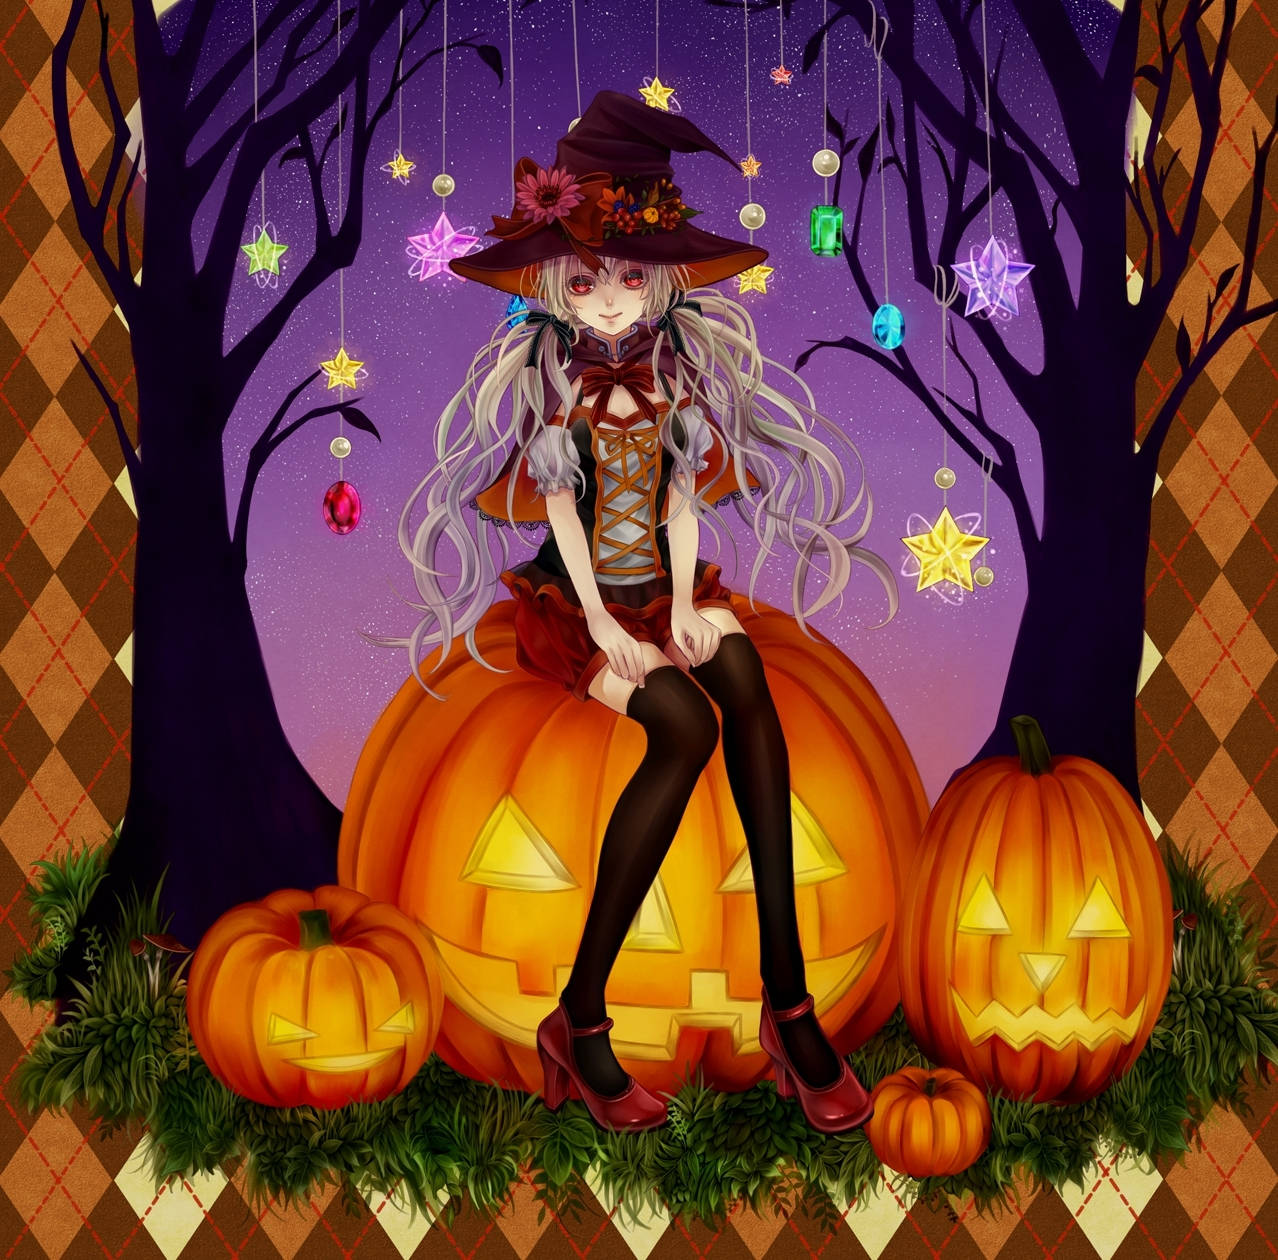 Get spooked this Halloween with Anime! Wallpaper